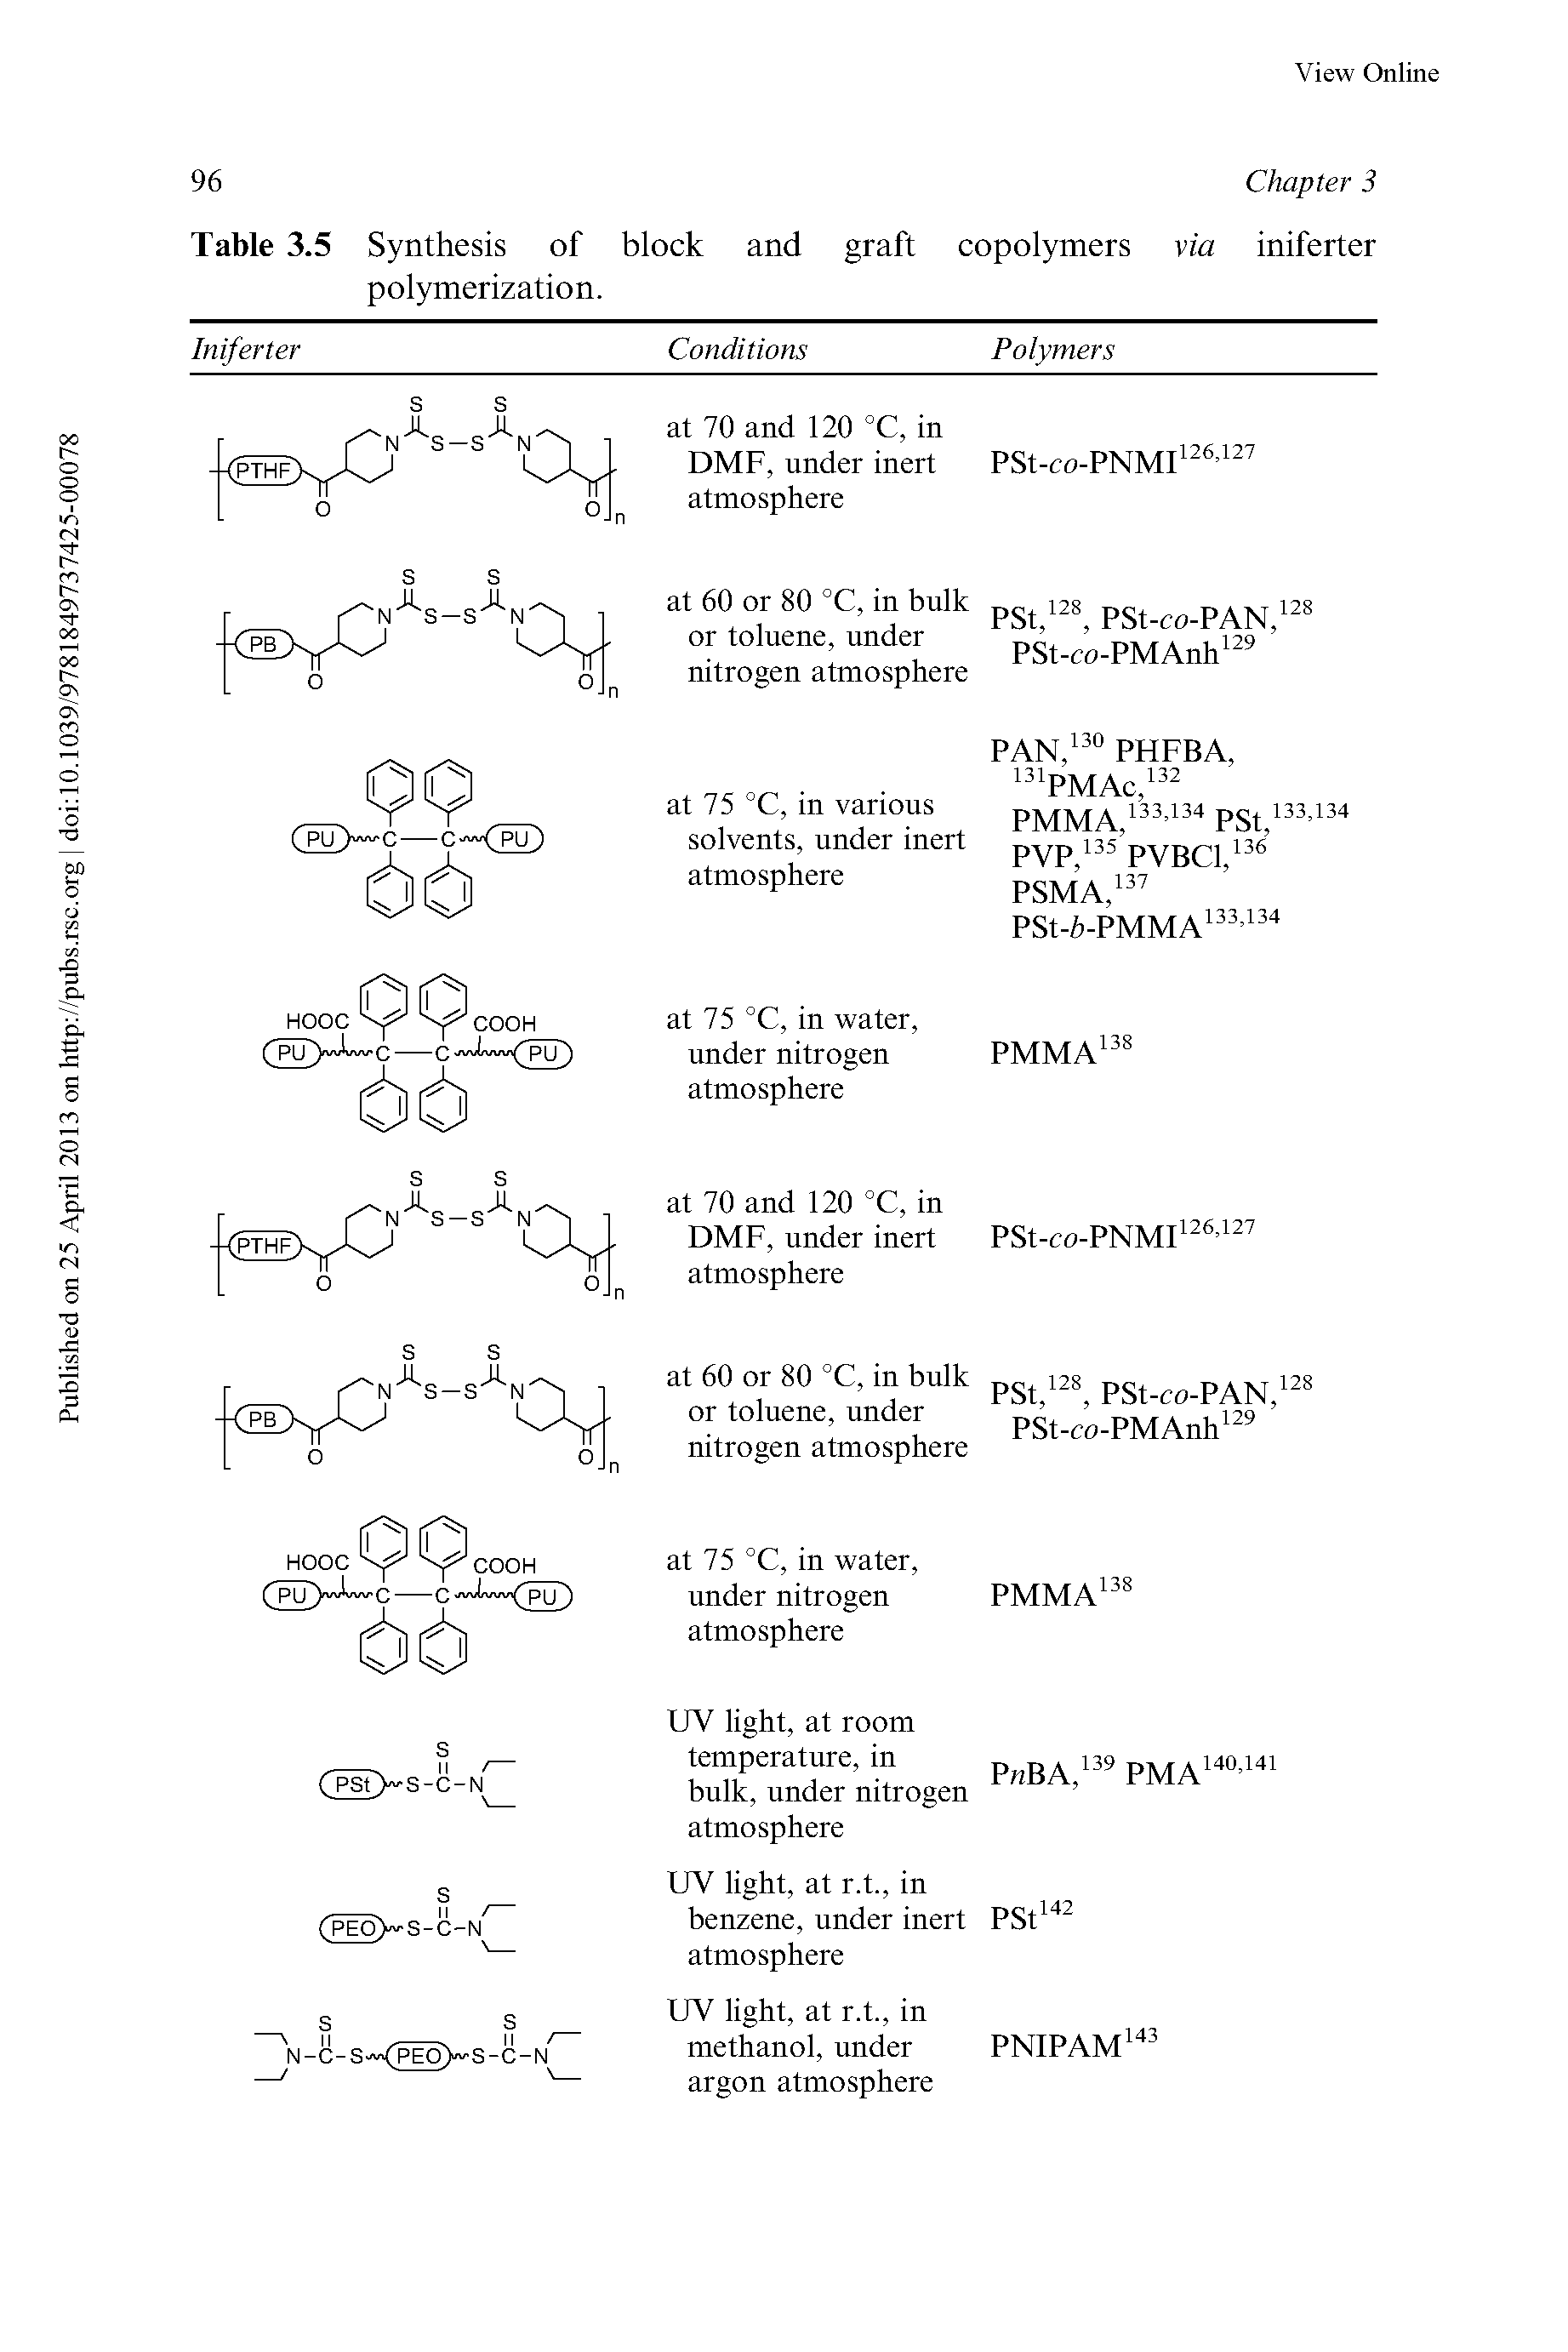 Table 3.5 Synthesis of block and graft copolymers via iniferter polymerization.